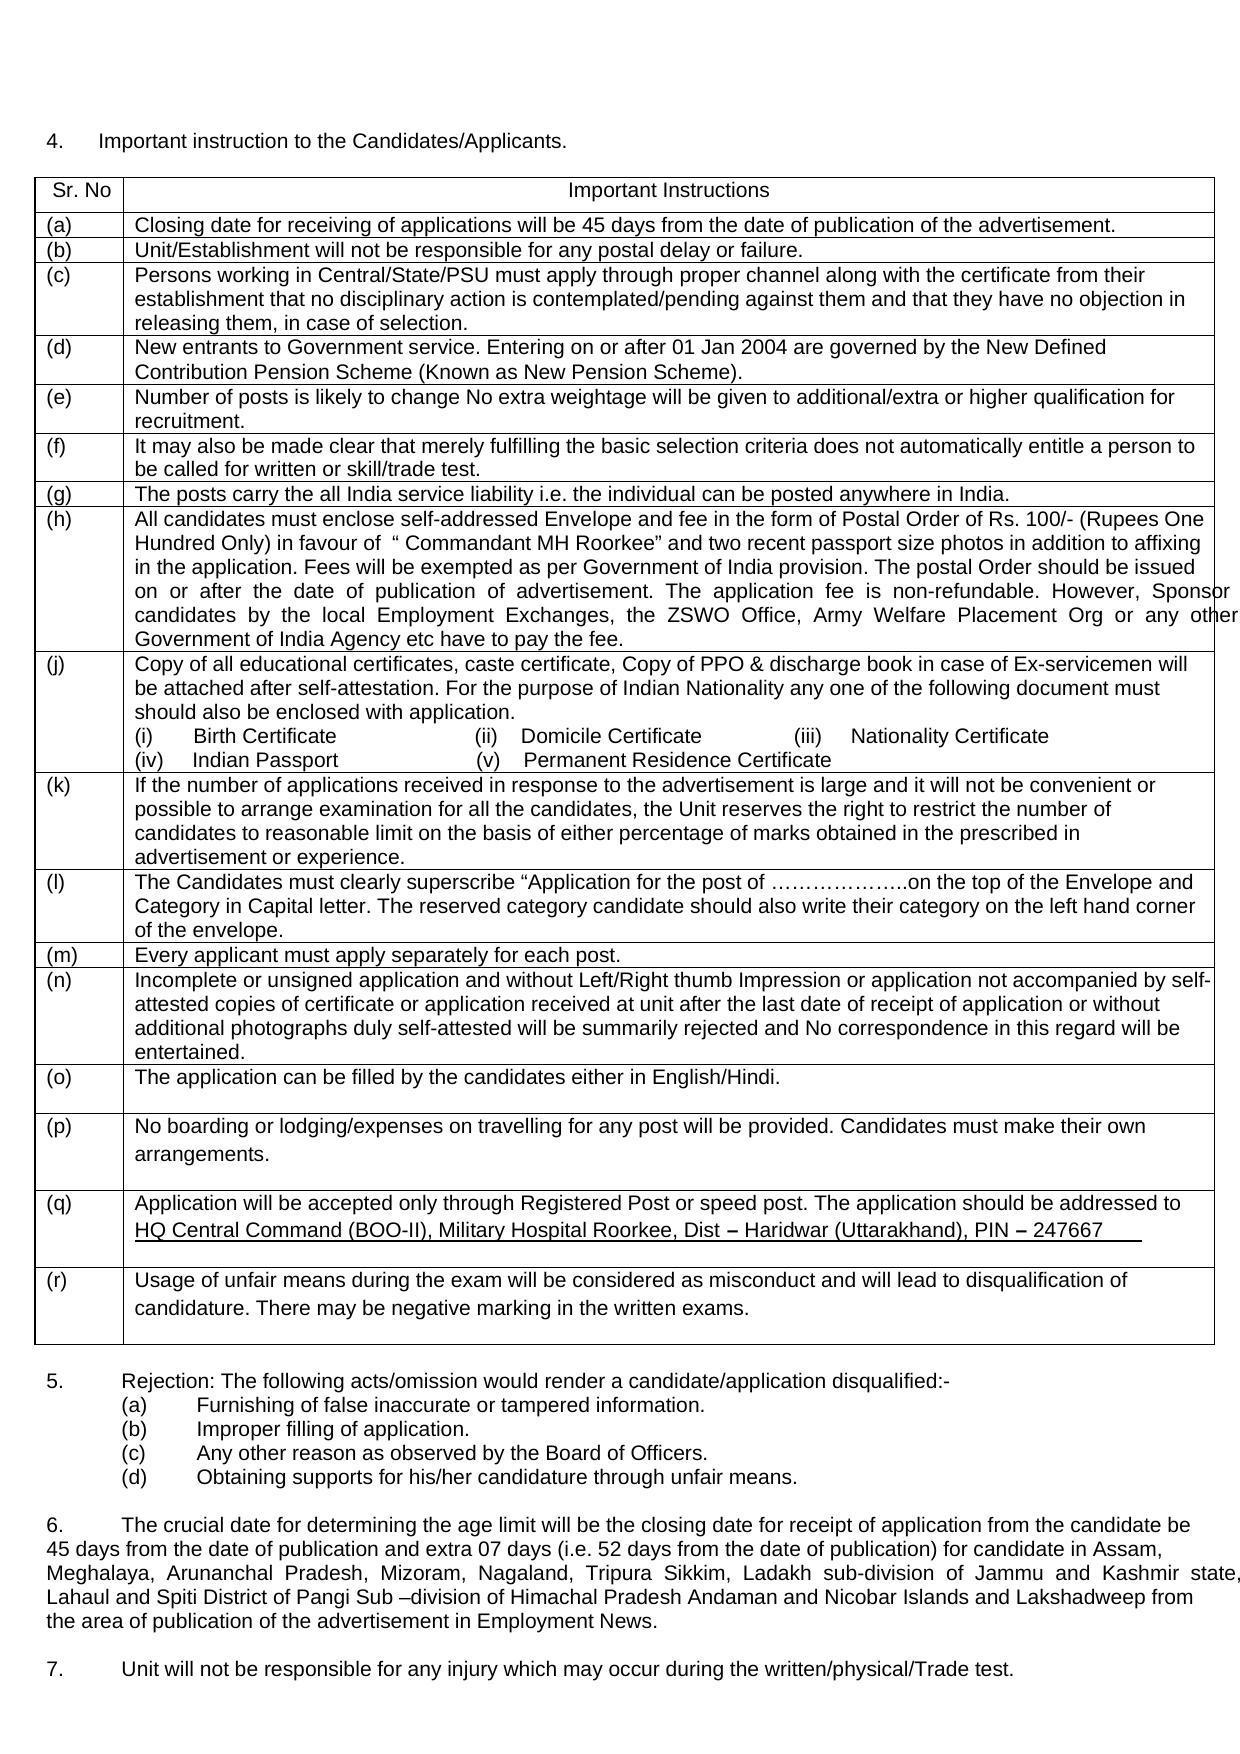 Army Military Hospital Roorkee Chowkidar and Various Posts Recruitment 2022 - Page 2